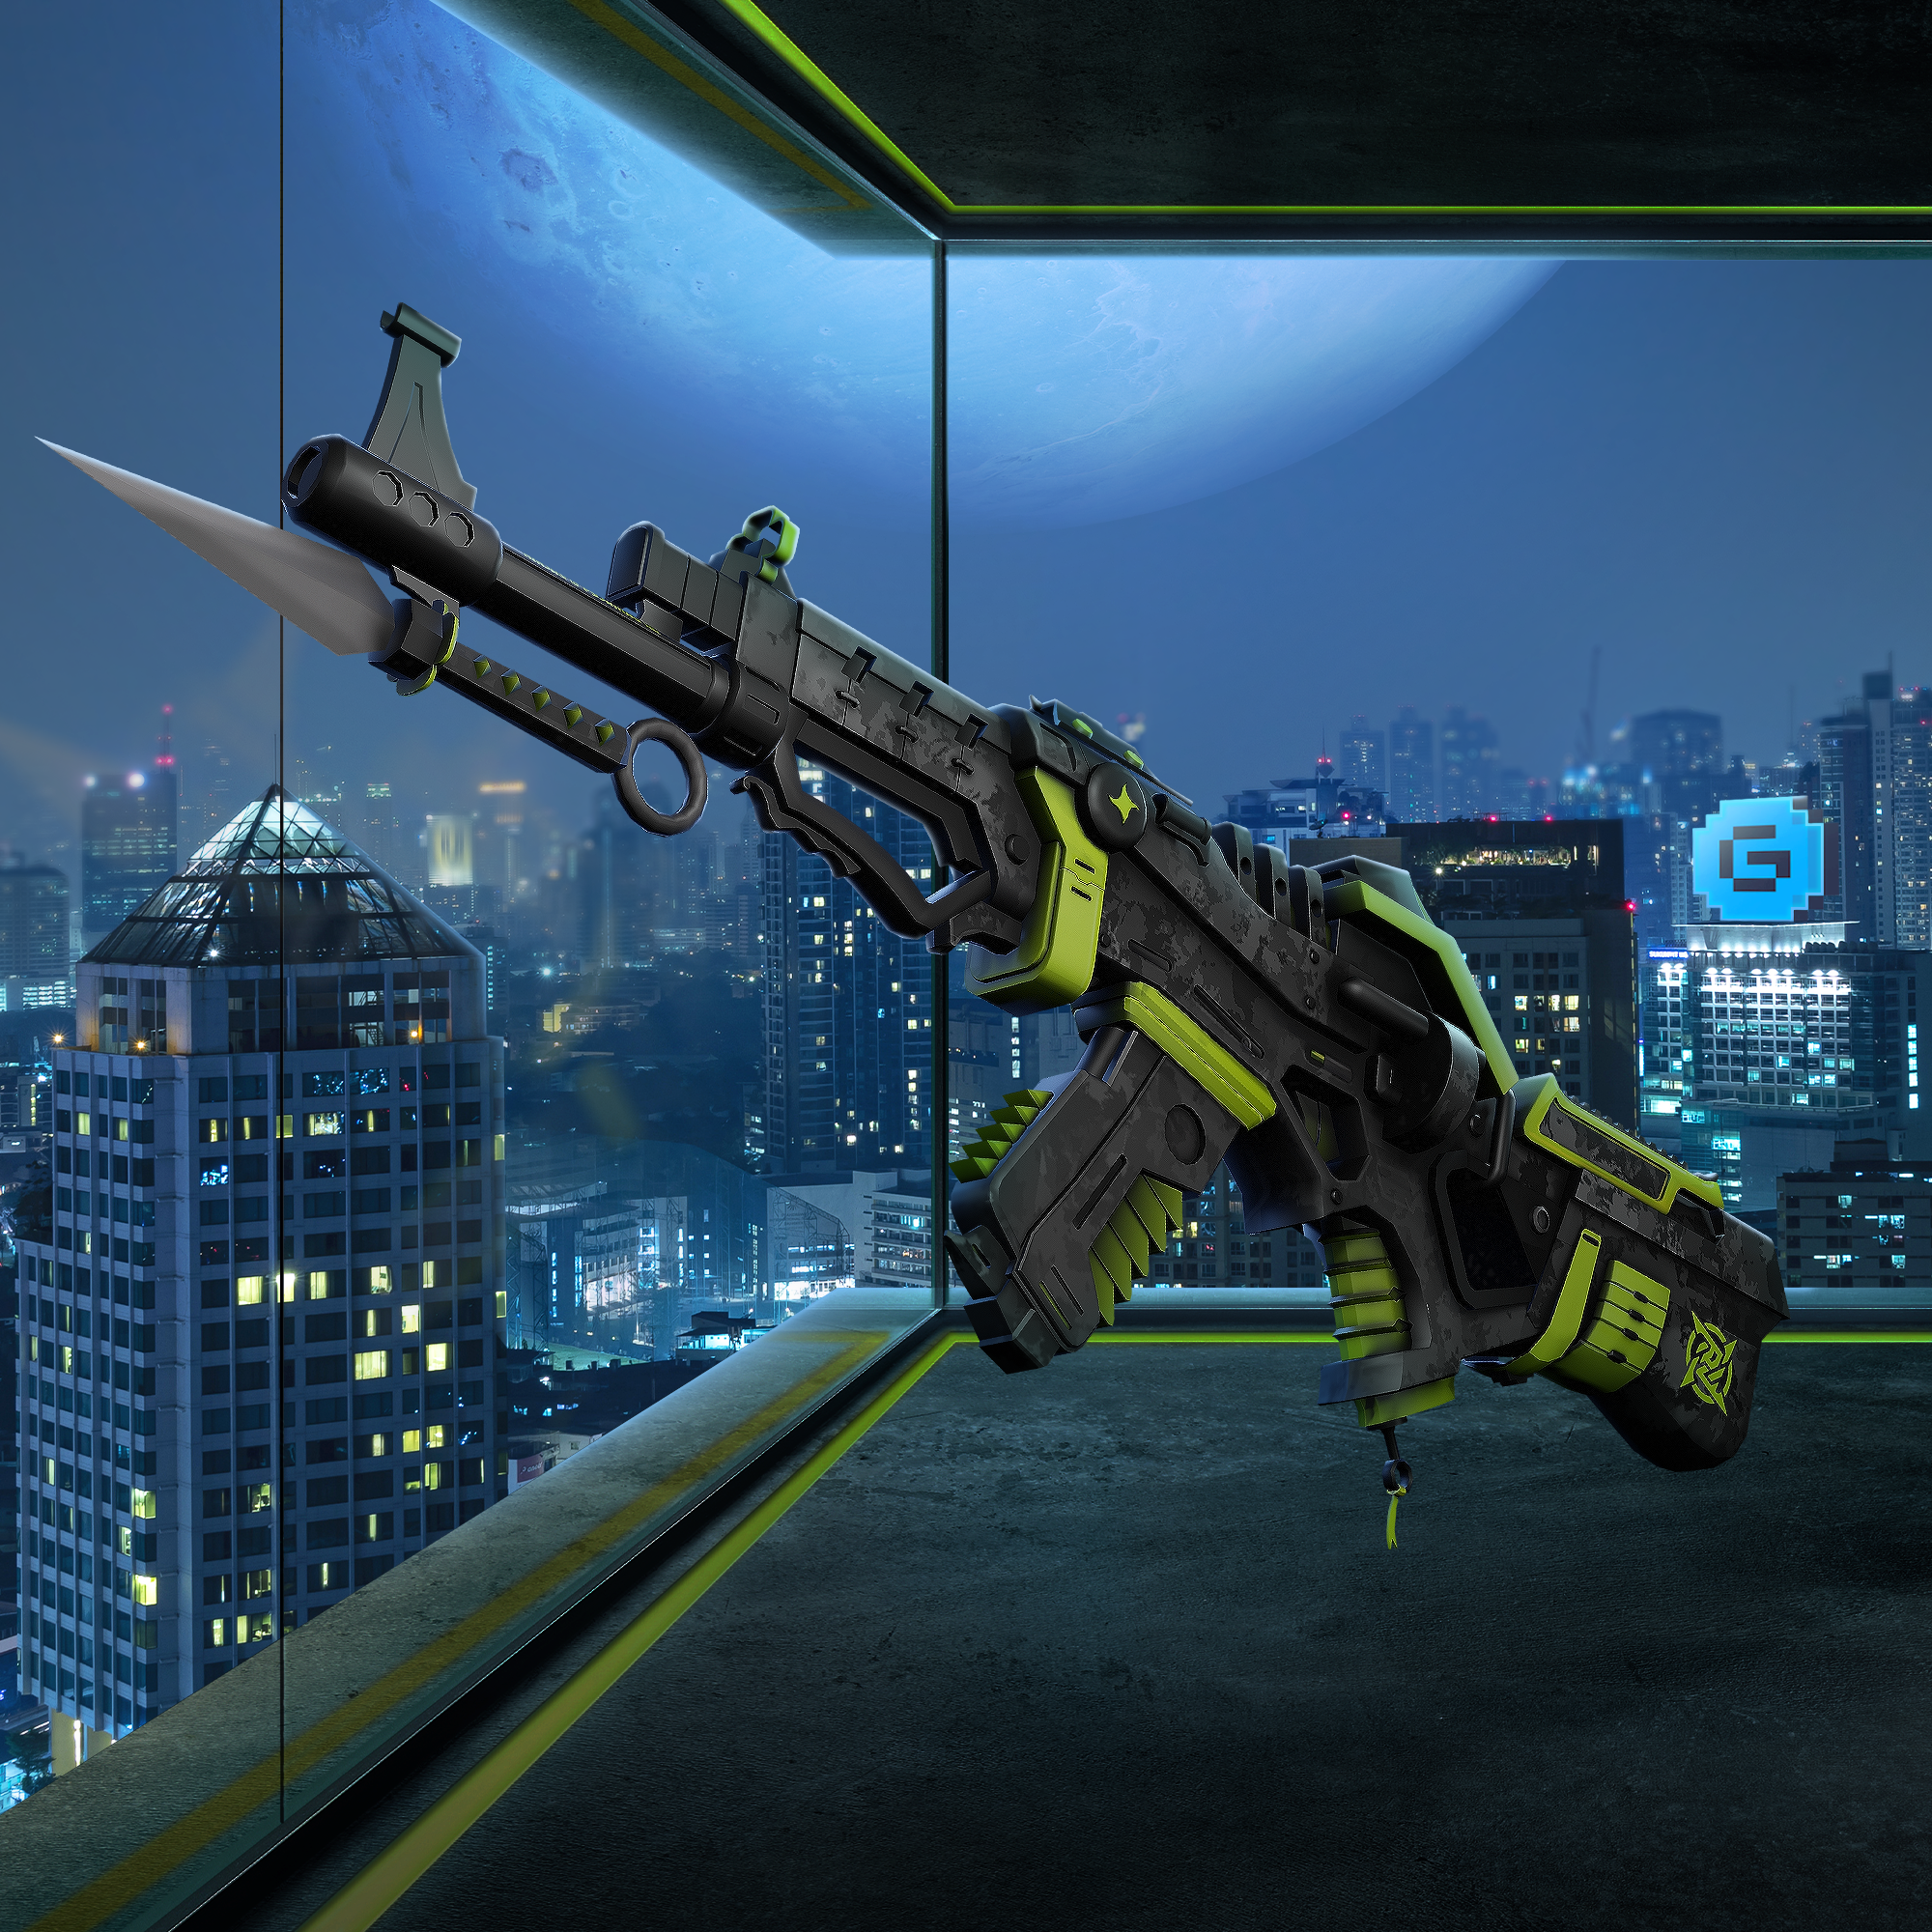 We have huge news for all you Ninjas in Pyjamas fans out there! Through our partnership with NIP, we have created an amazing new skin for the game ev.io that is sure